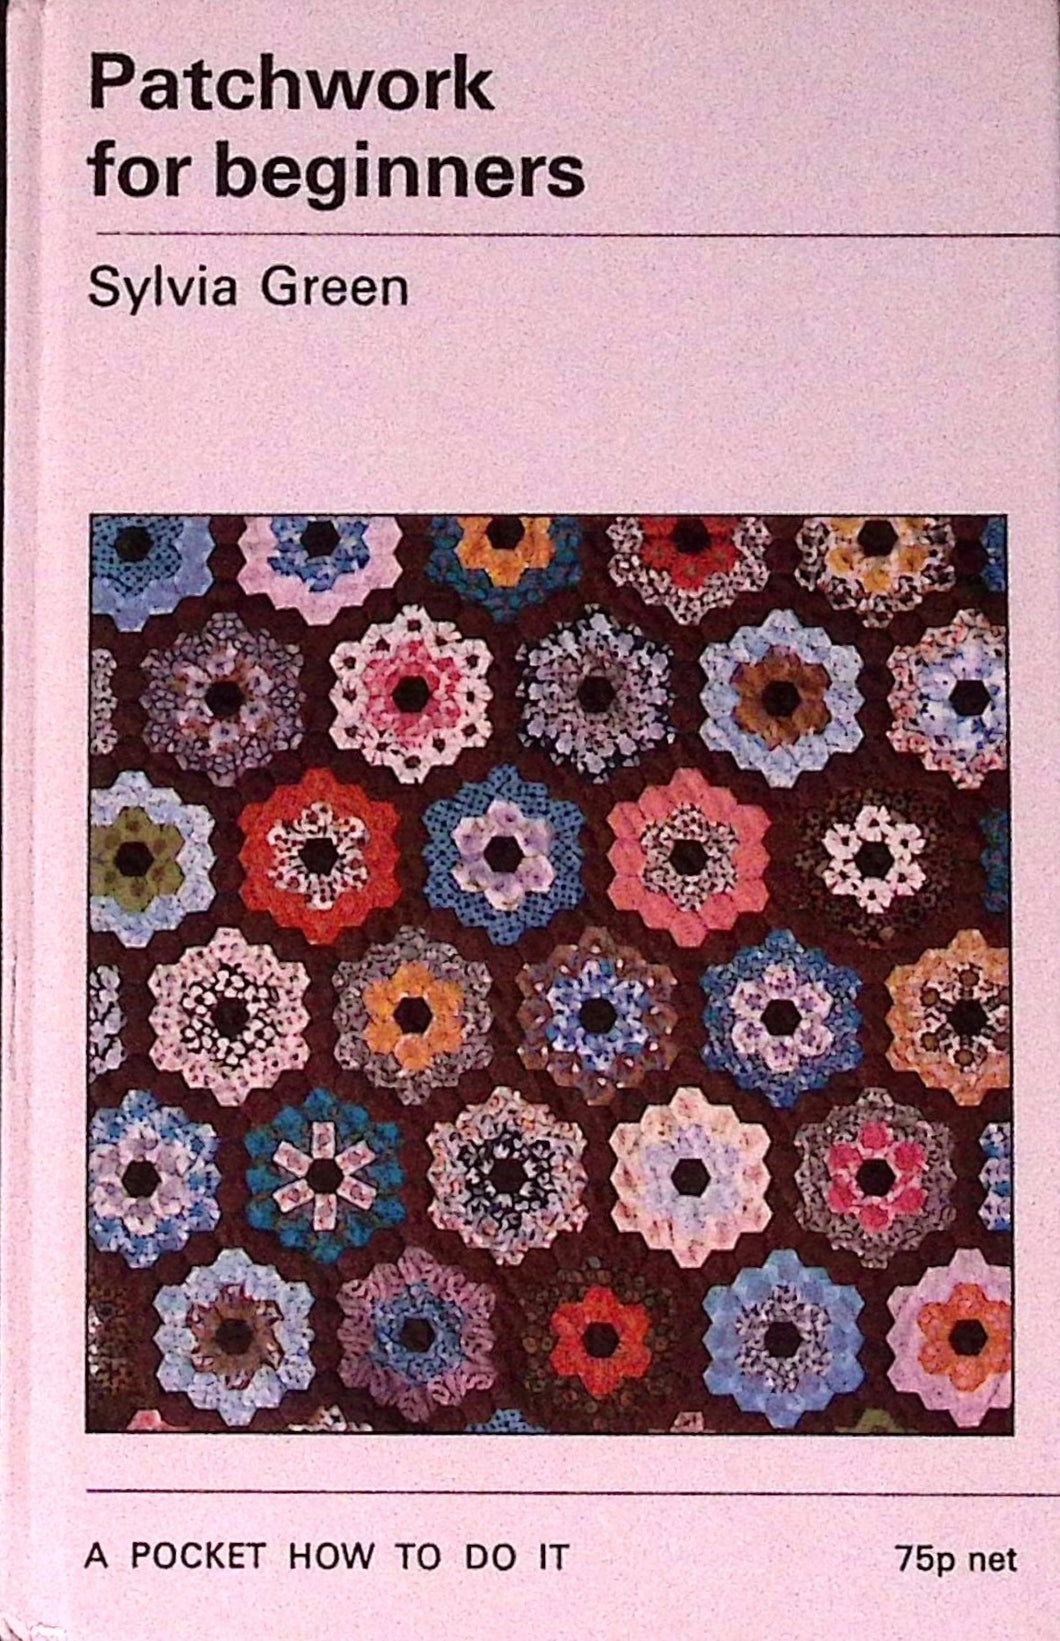 Patchwork for Beginners by Silvia Green